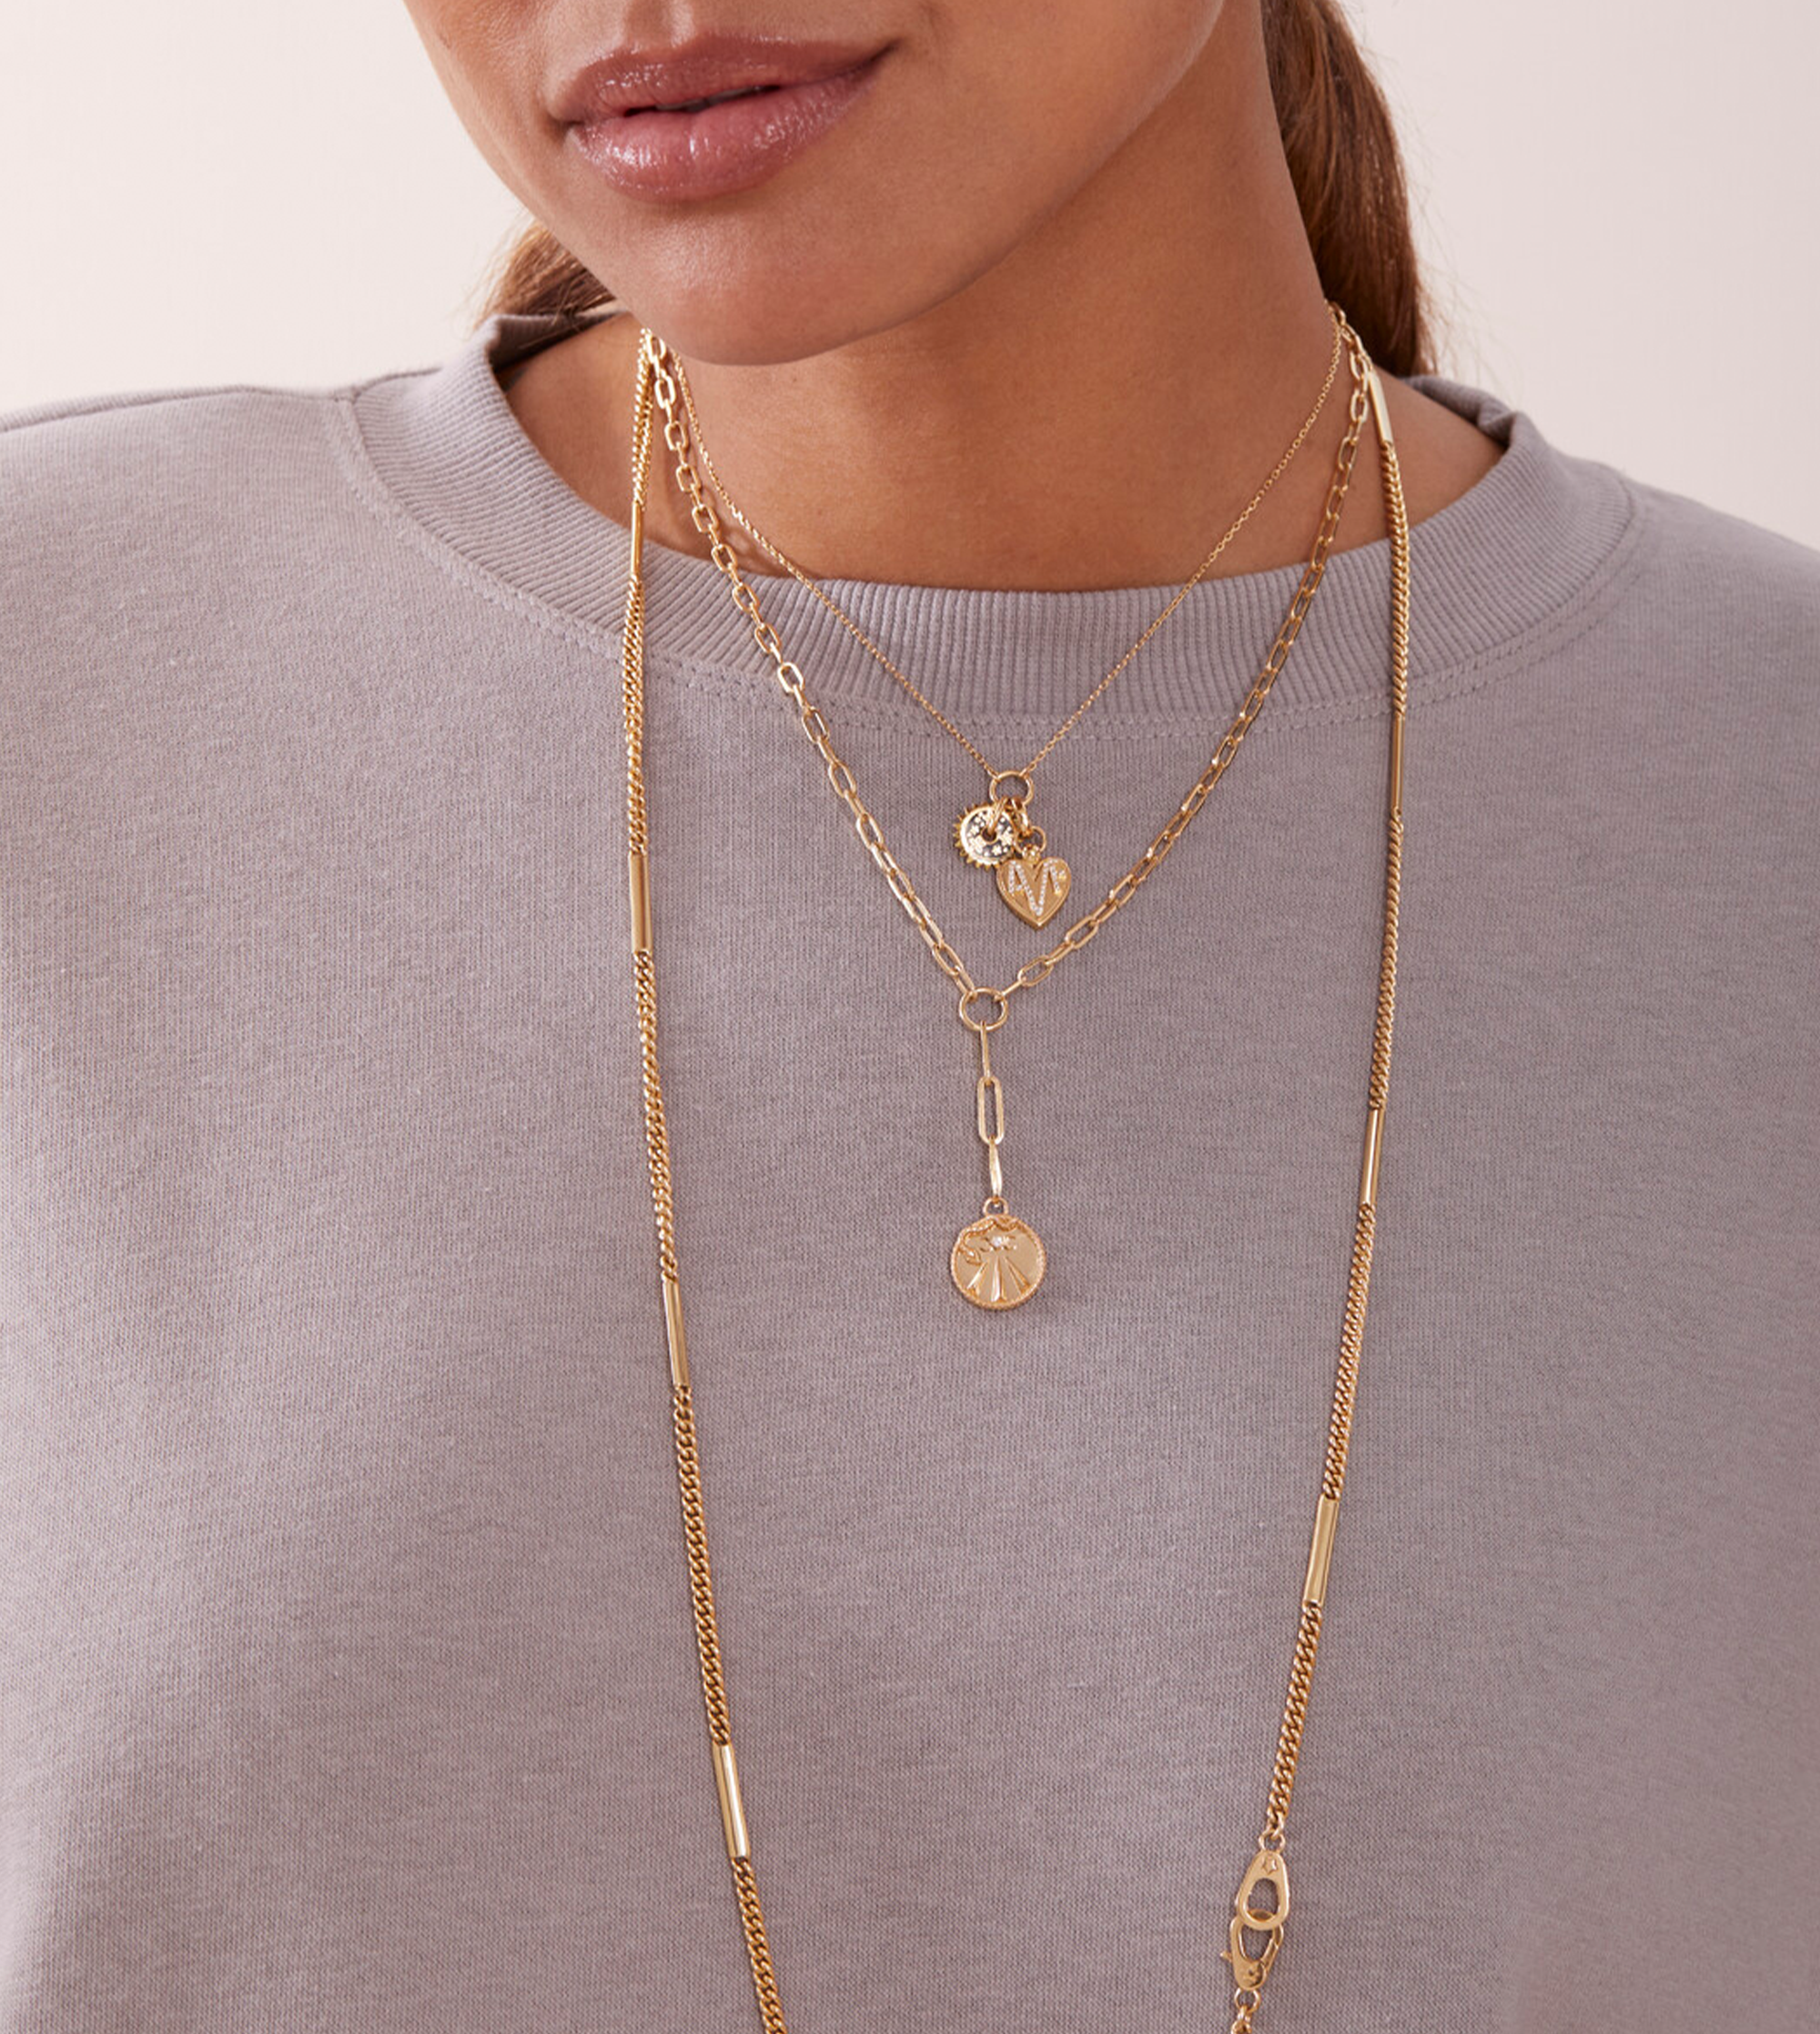 Mind Body Soul : Refined Clip Extension Chain Necklace